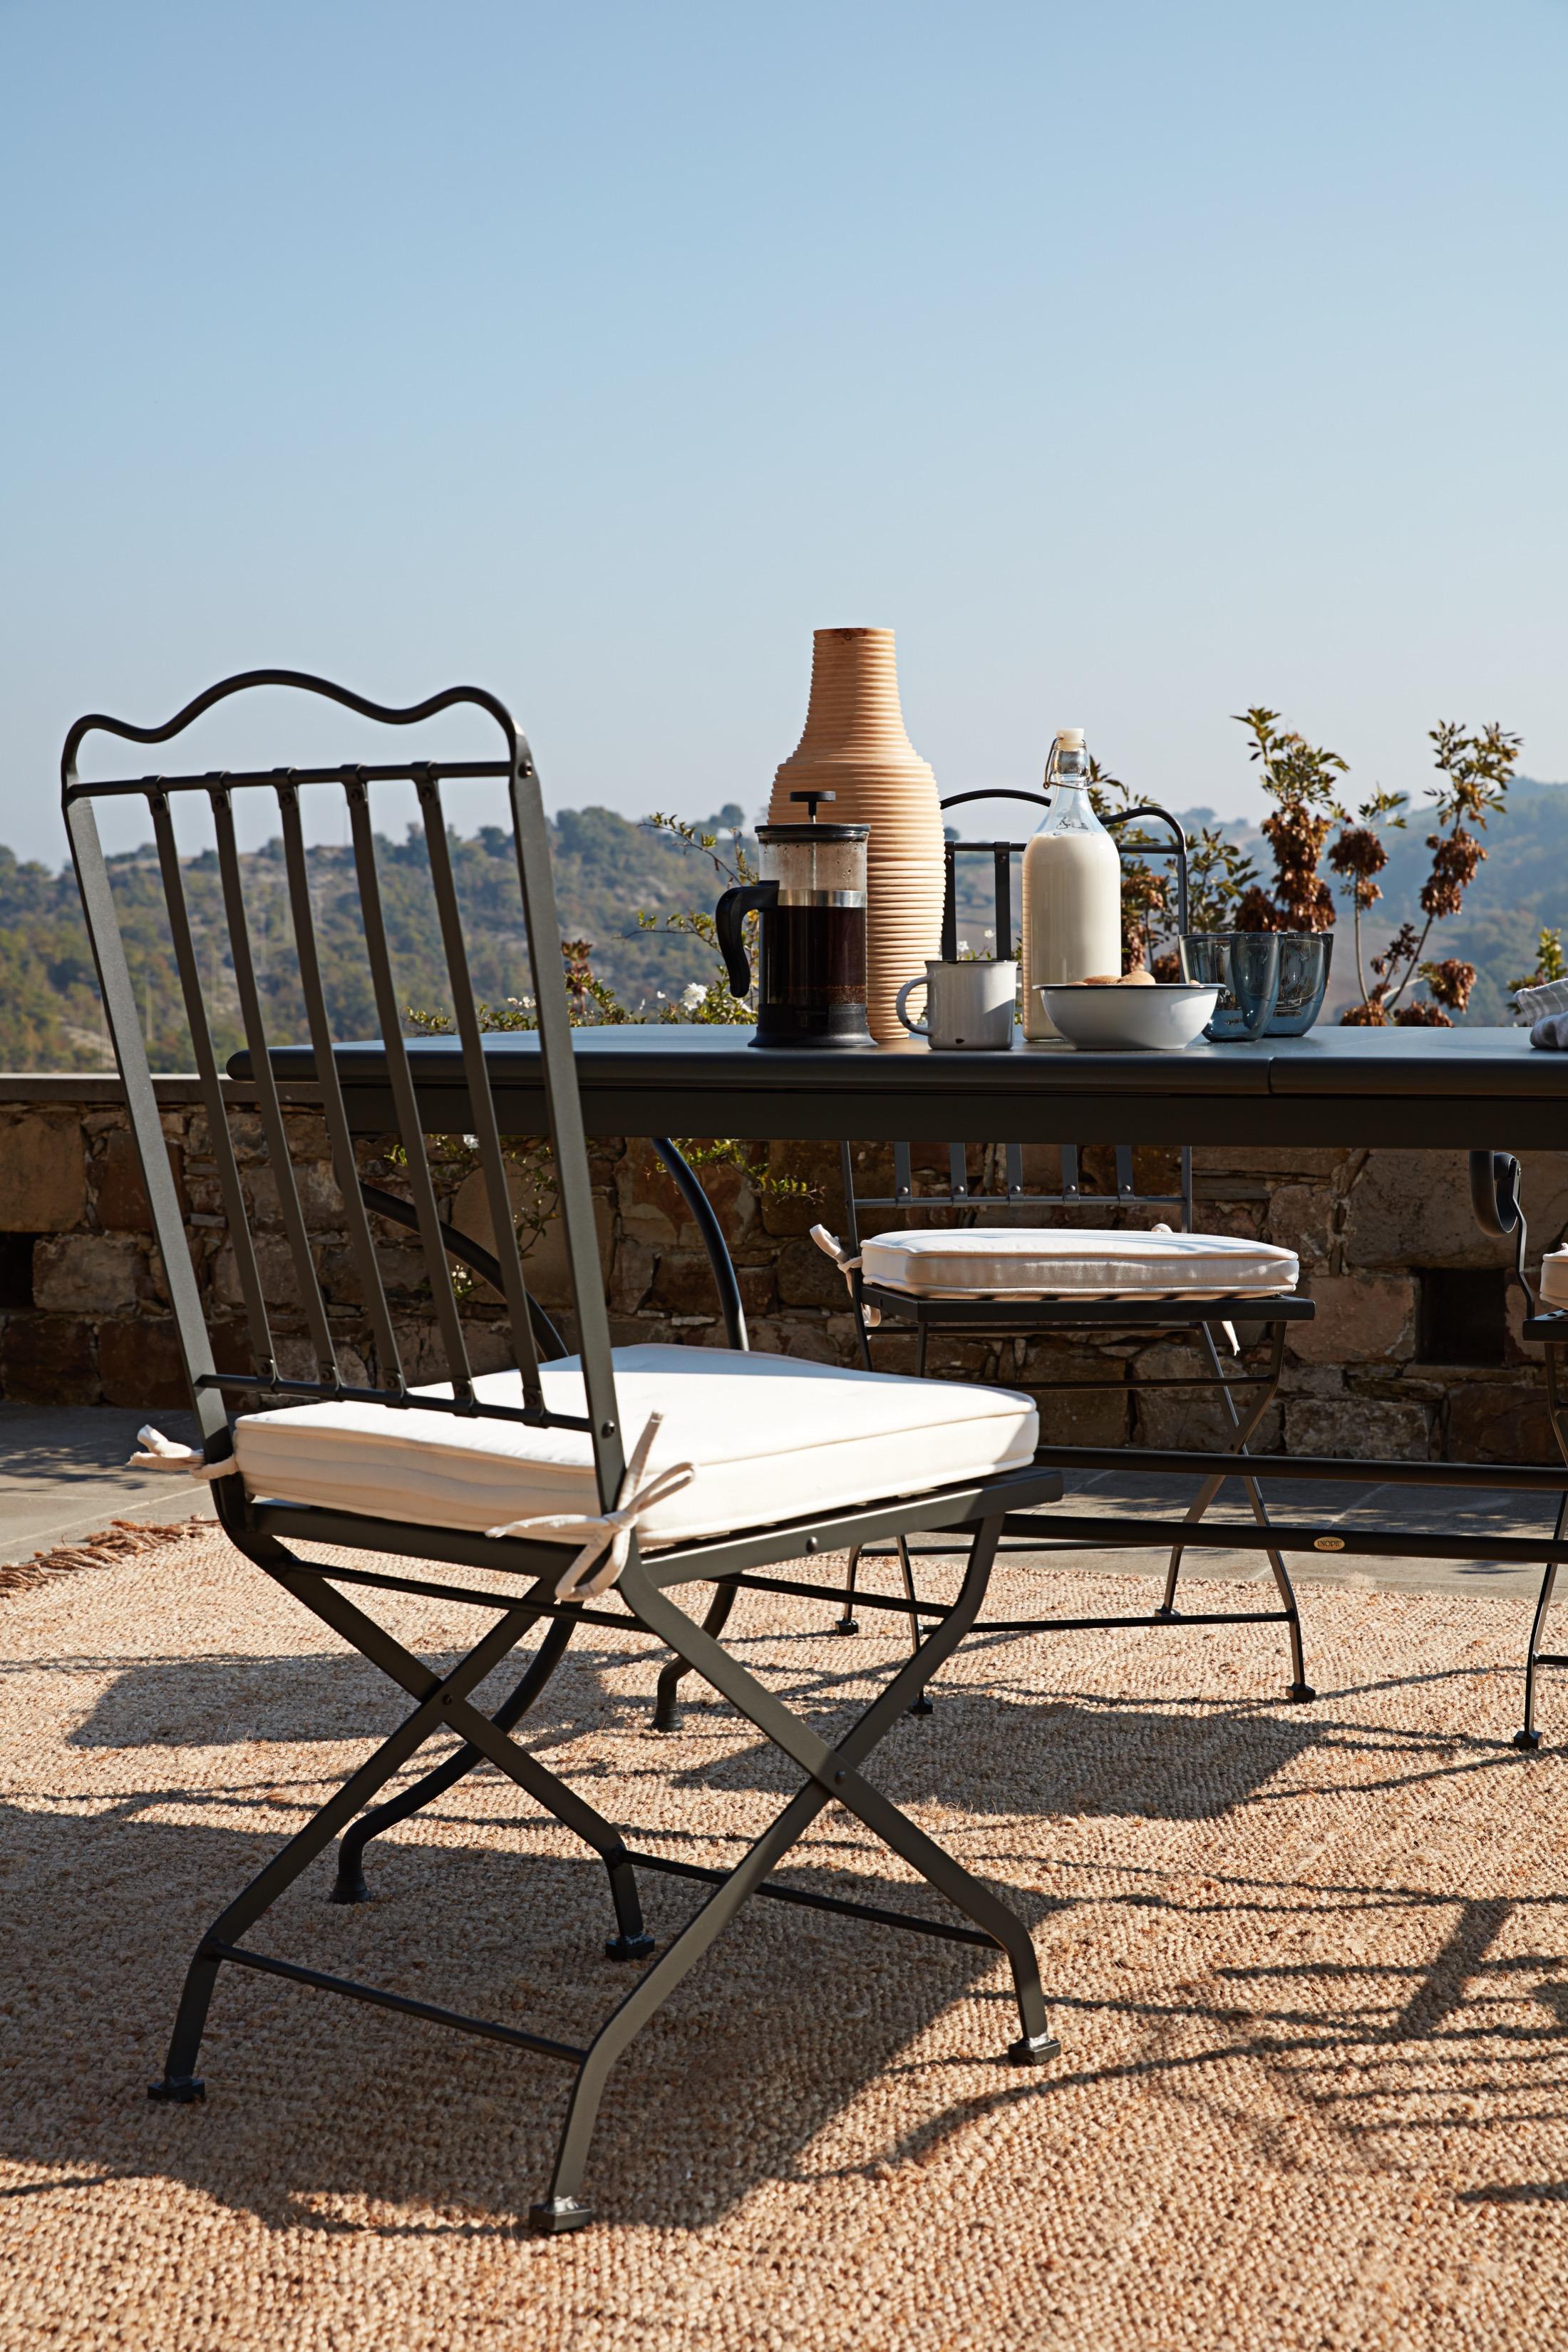 Italian Unopiu' Toscana Chair Outdoor Collection For Sale